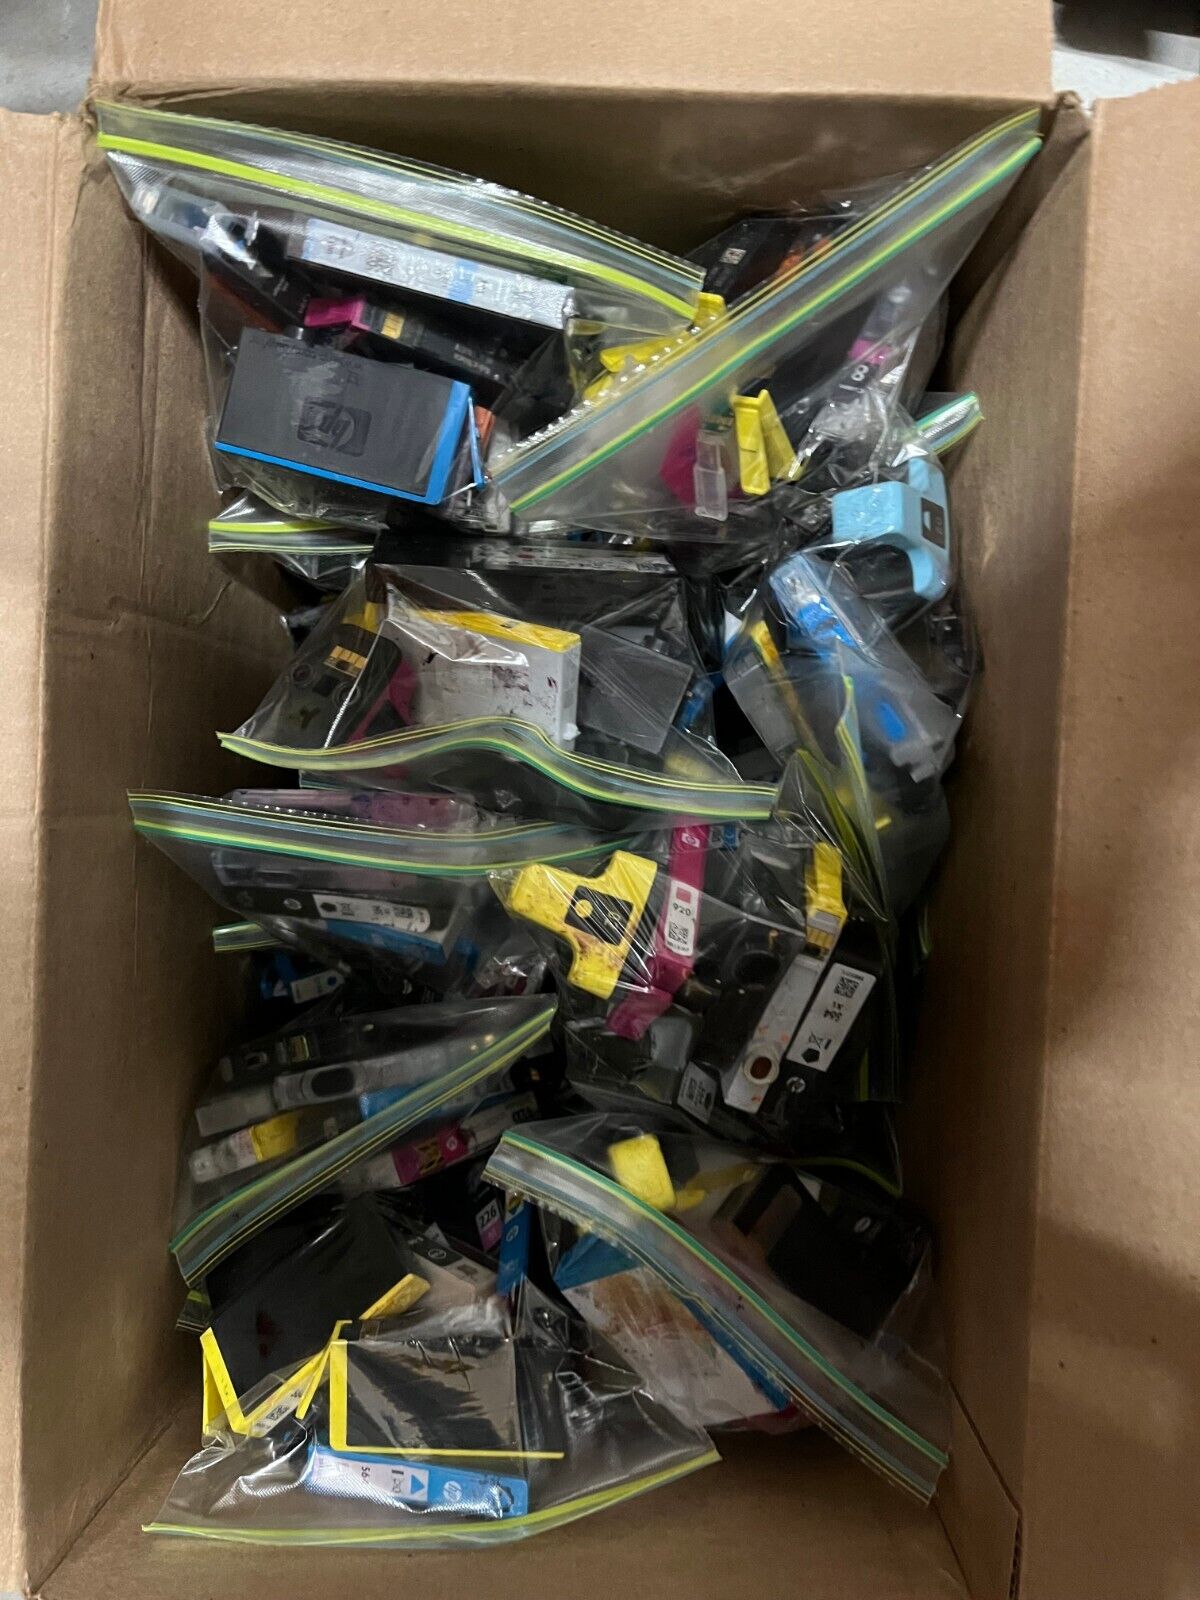 MIX LOT OF 150 BAGGED EMPTY INK CARTRIDGES FOR$300 STAPLES or OFFICE MAX REWARDS